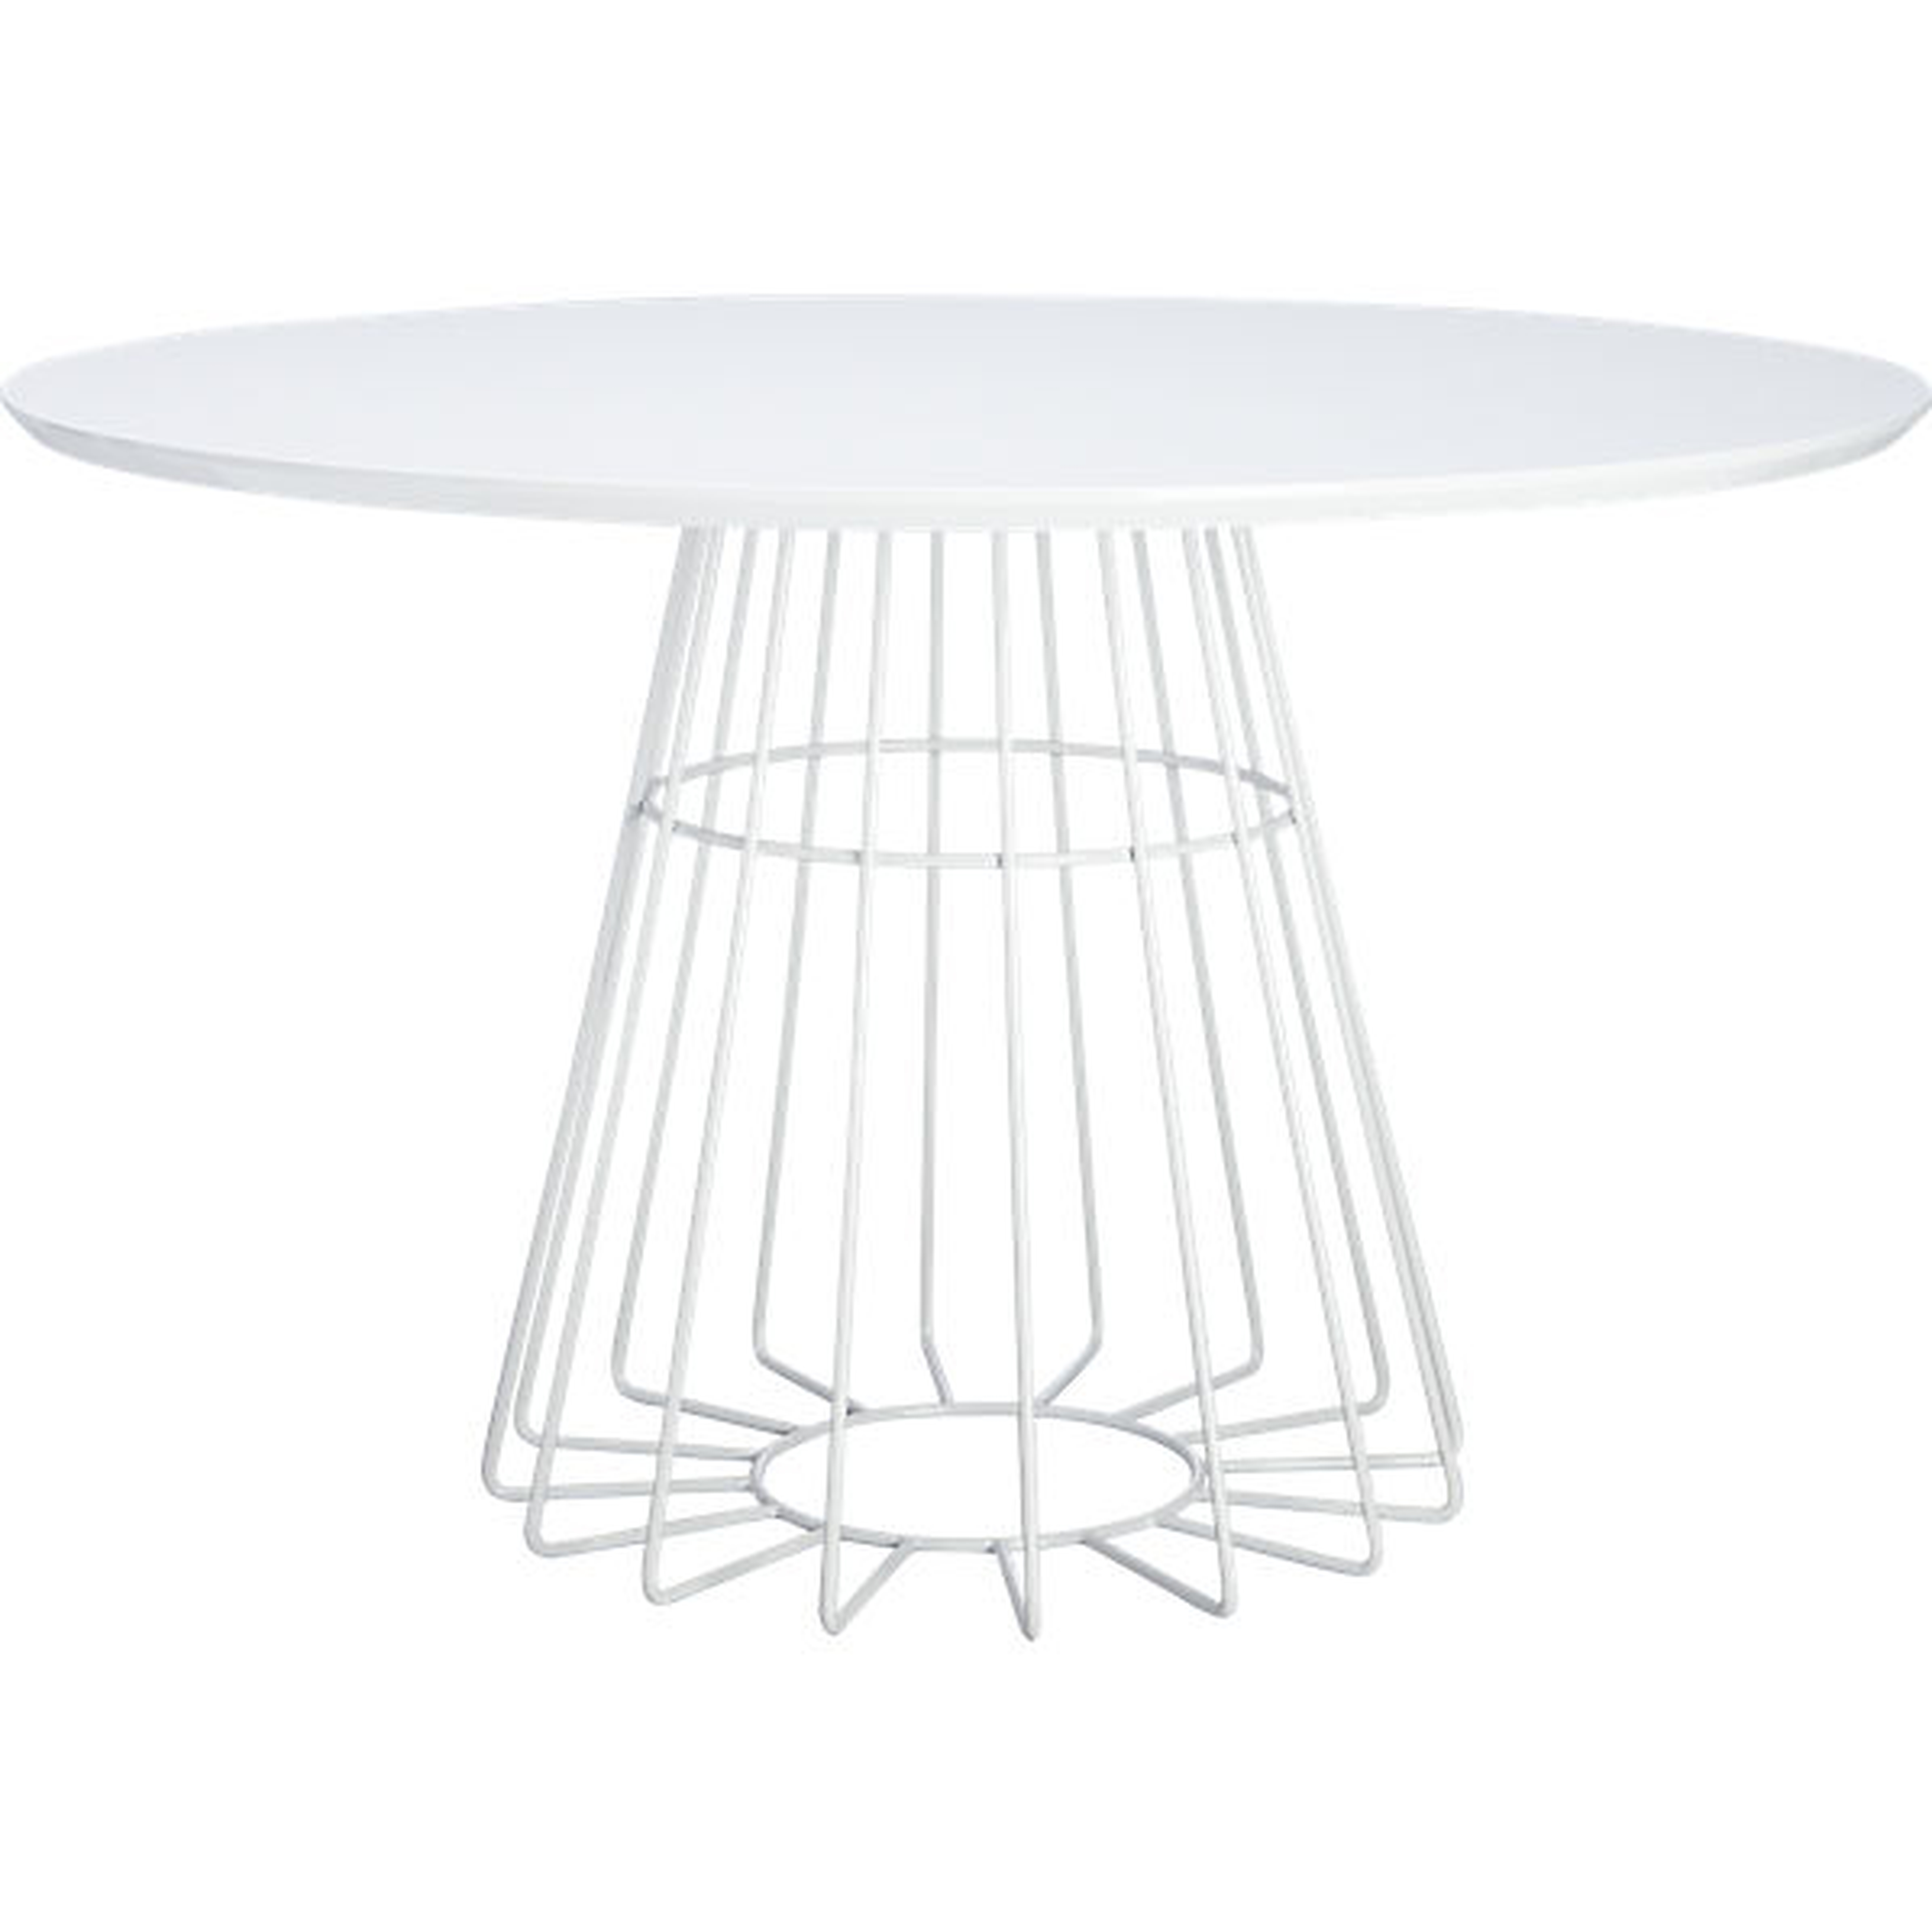 Compass dining table - CB2